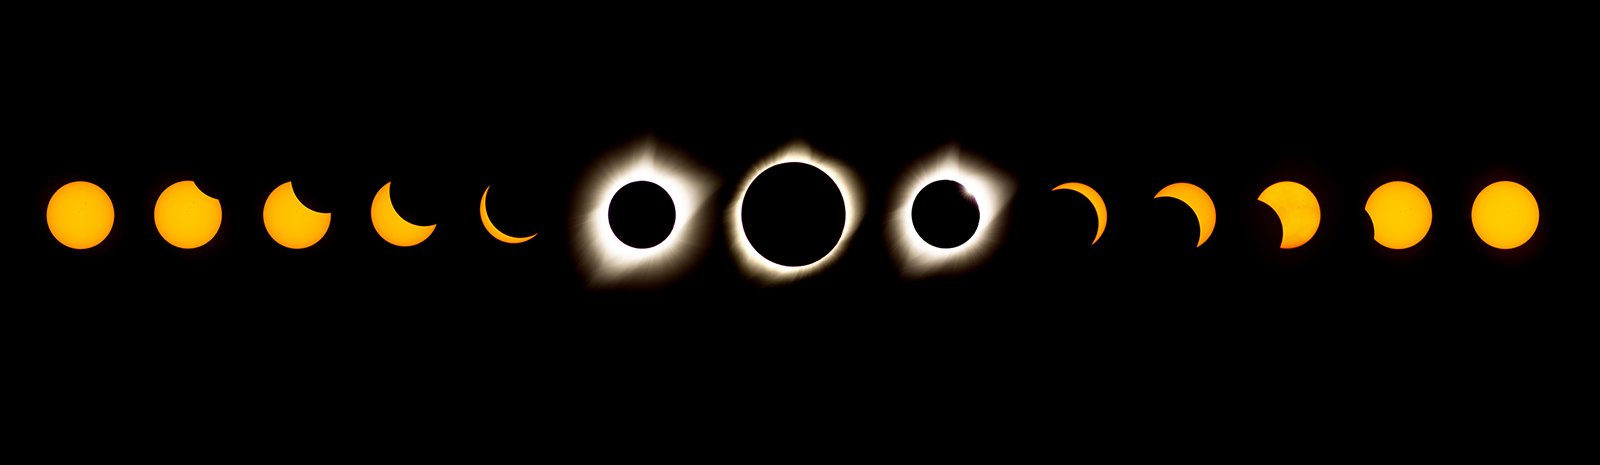 Glyph graphics for solar eclipse